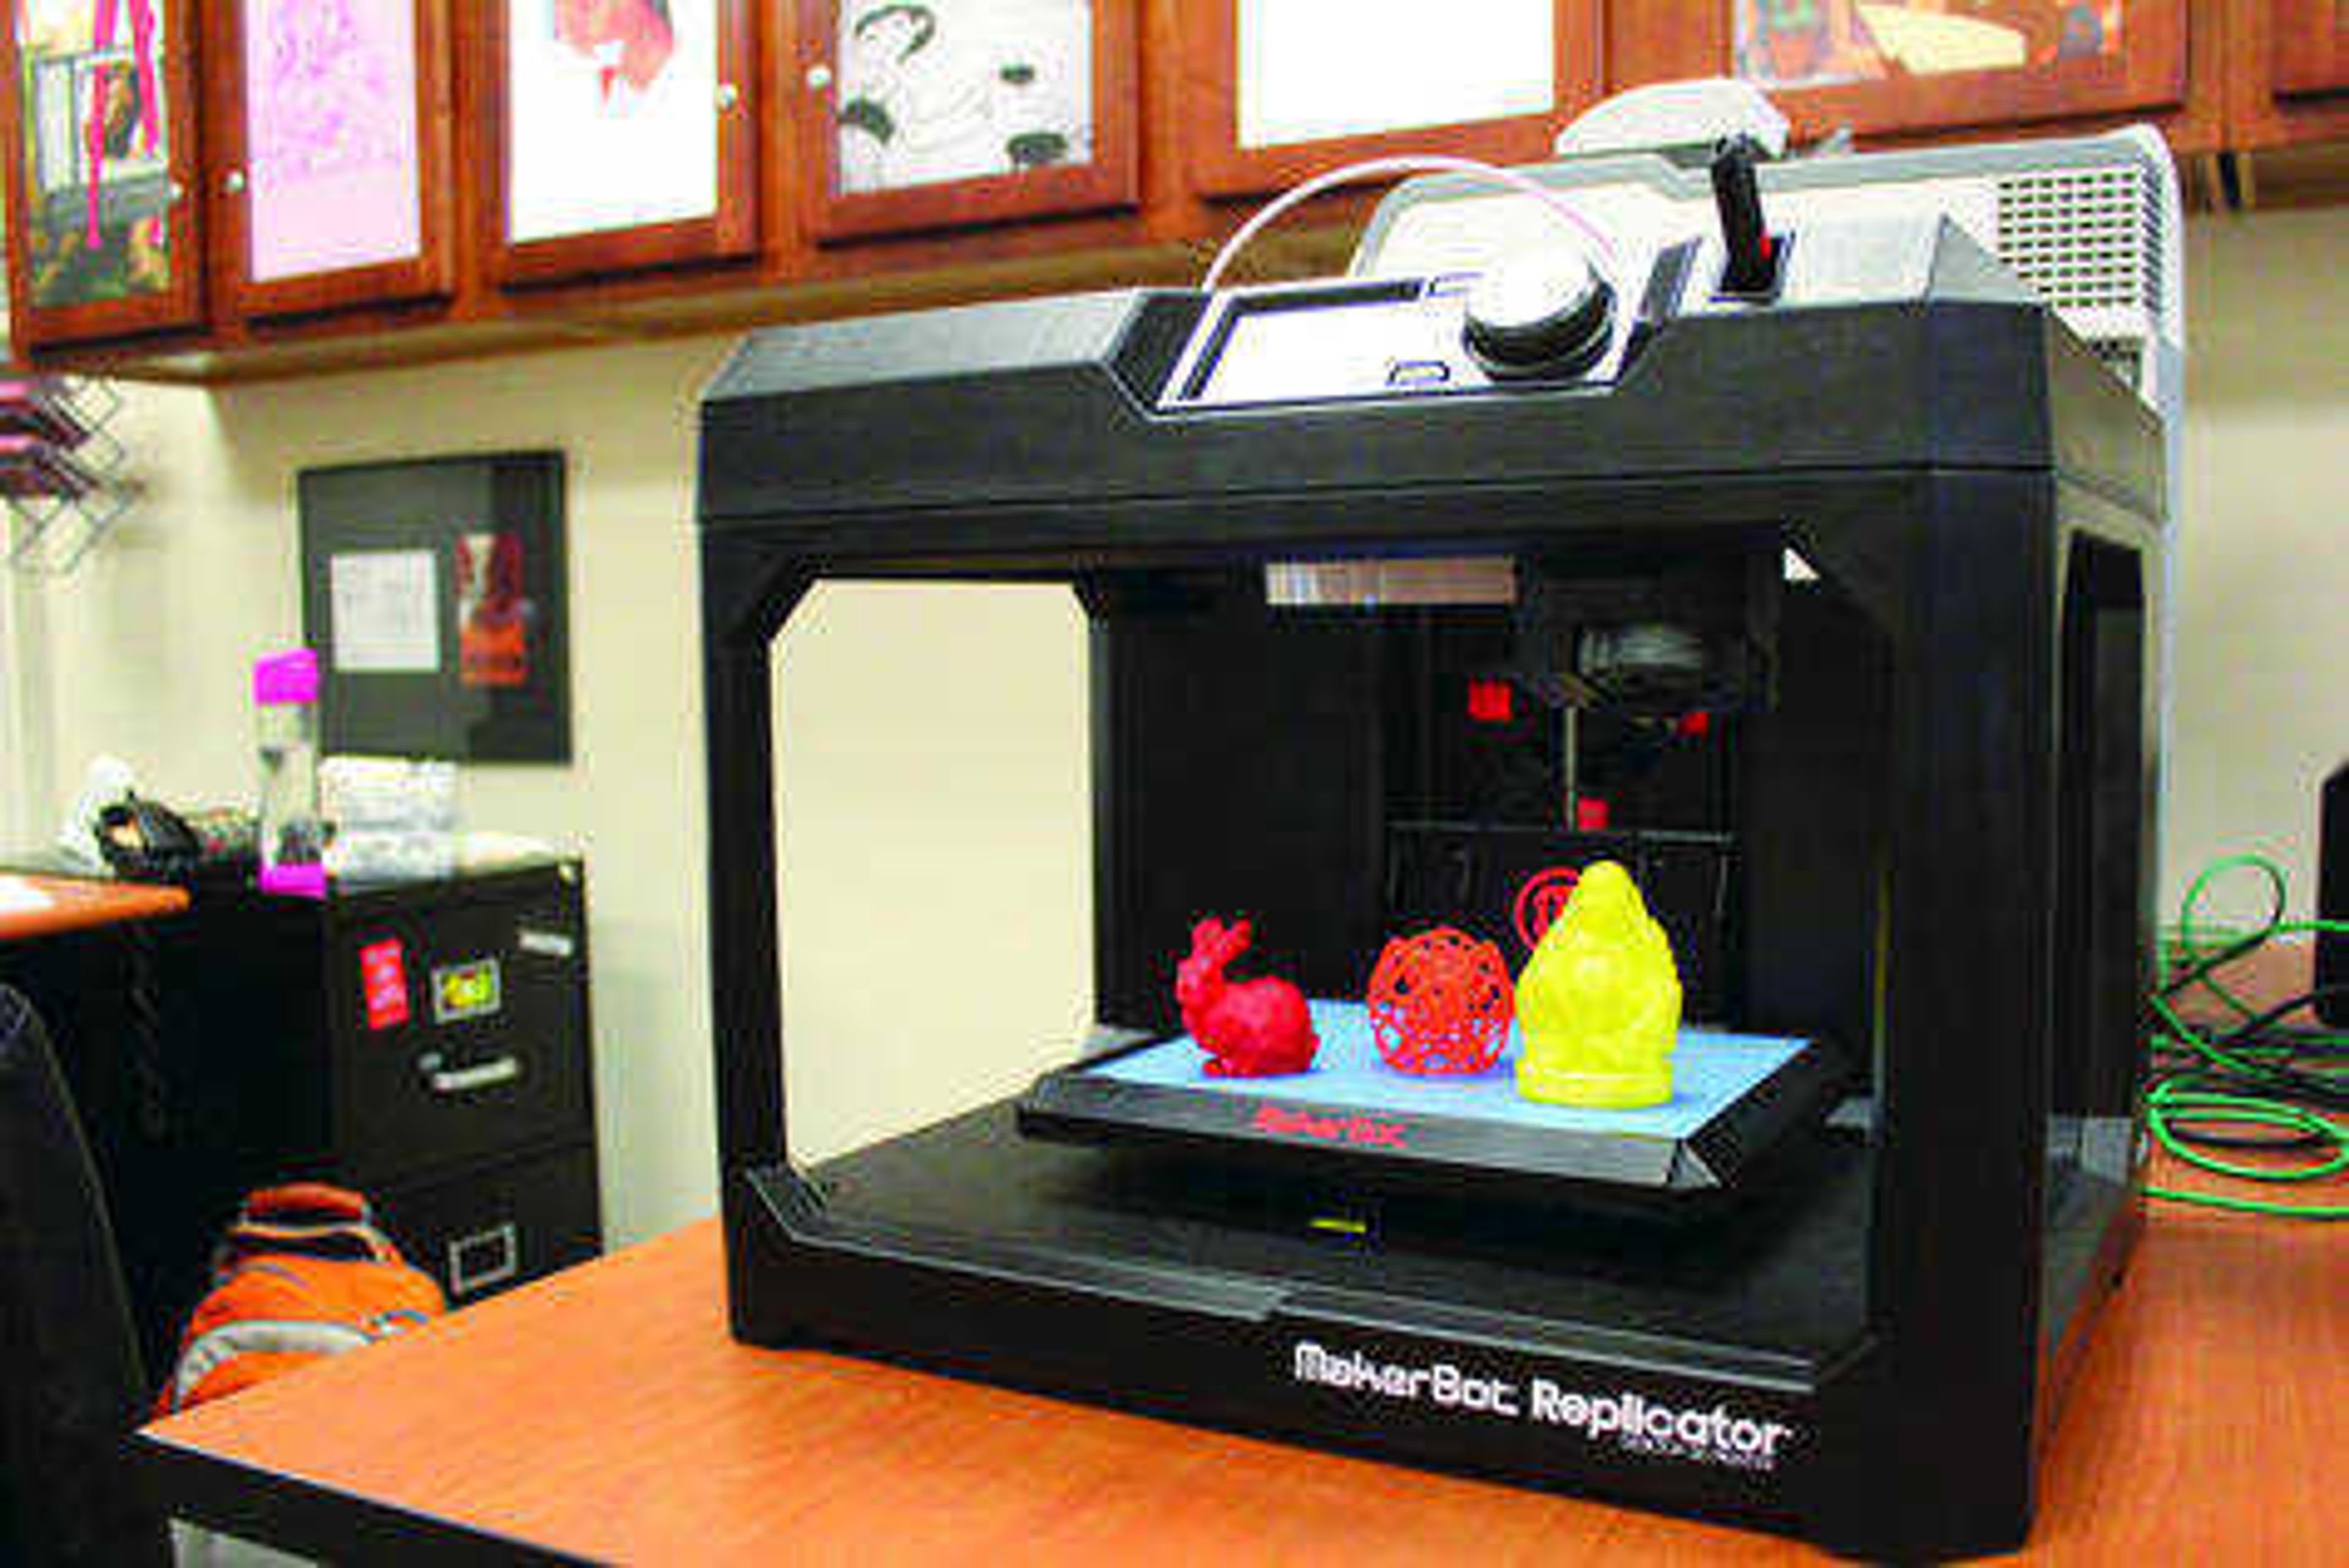 The Makerbot Replicator 3D Printer, along with other digital design programs, is a tool offered to Southeast students through the Heather MacDonald Greene Multimedia Center. Photos by Amber Cason